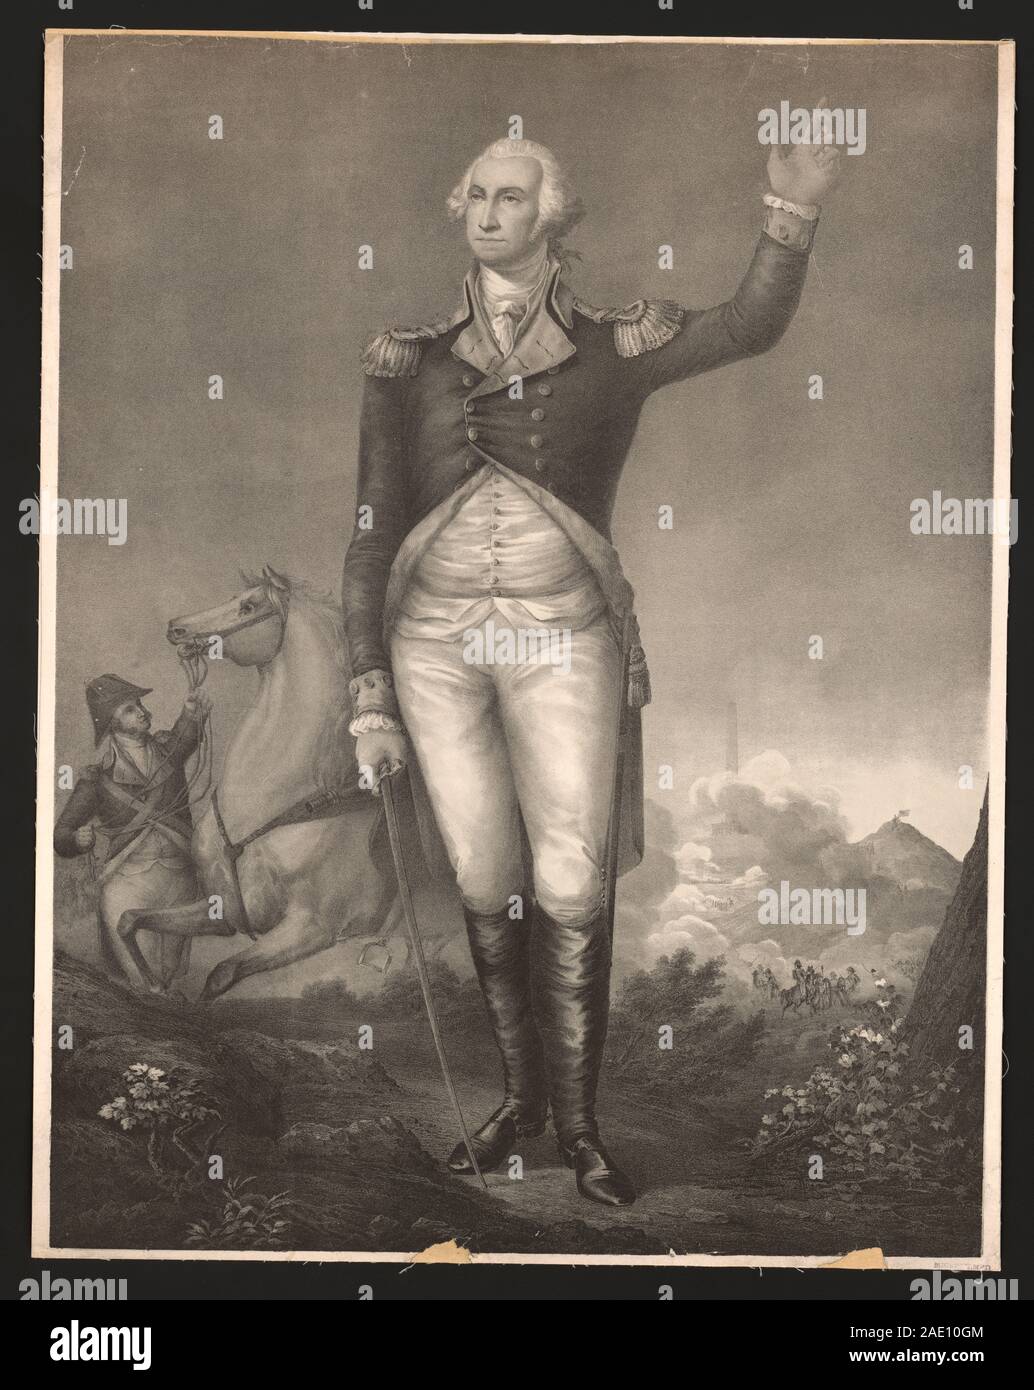 George Washington (February 22, 1732– December 14, 1799) was an American  political leader, military general, statesman, and Founding Father who  served as the first president of the United States from 1789 to